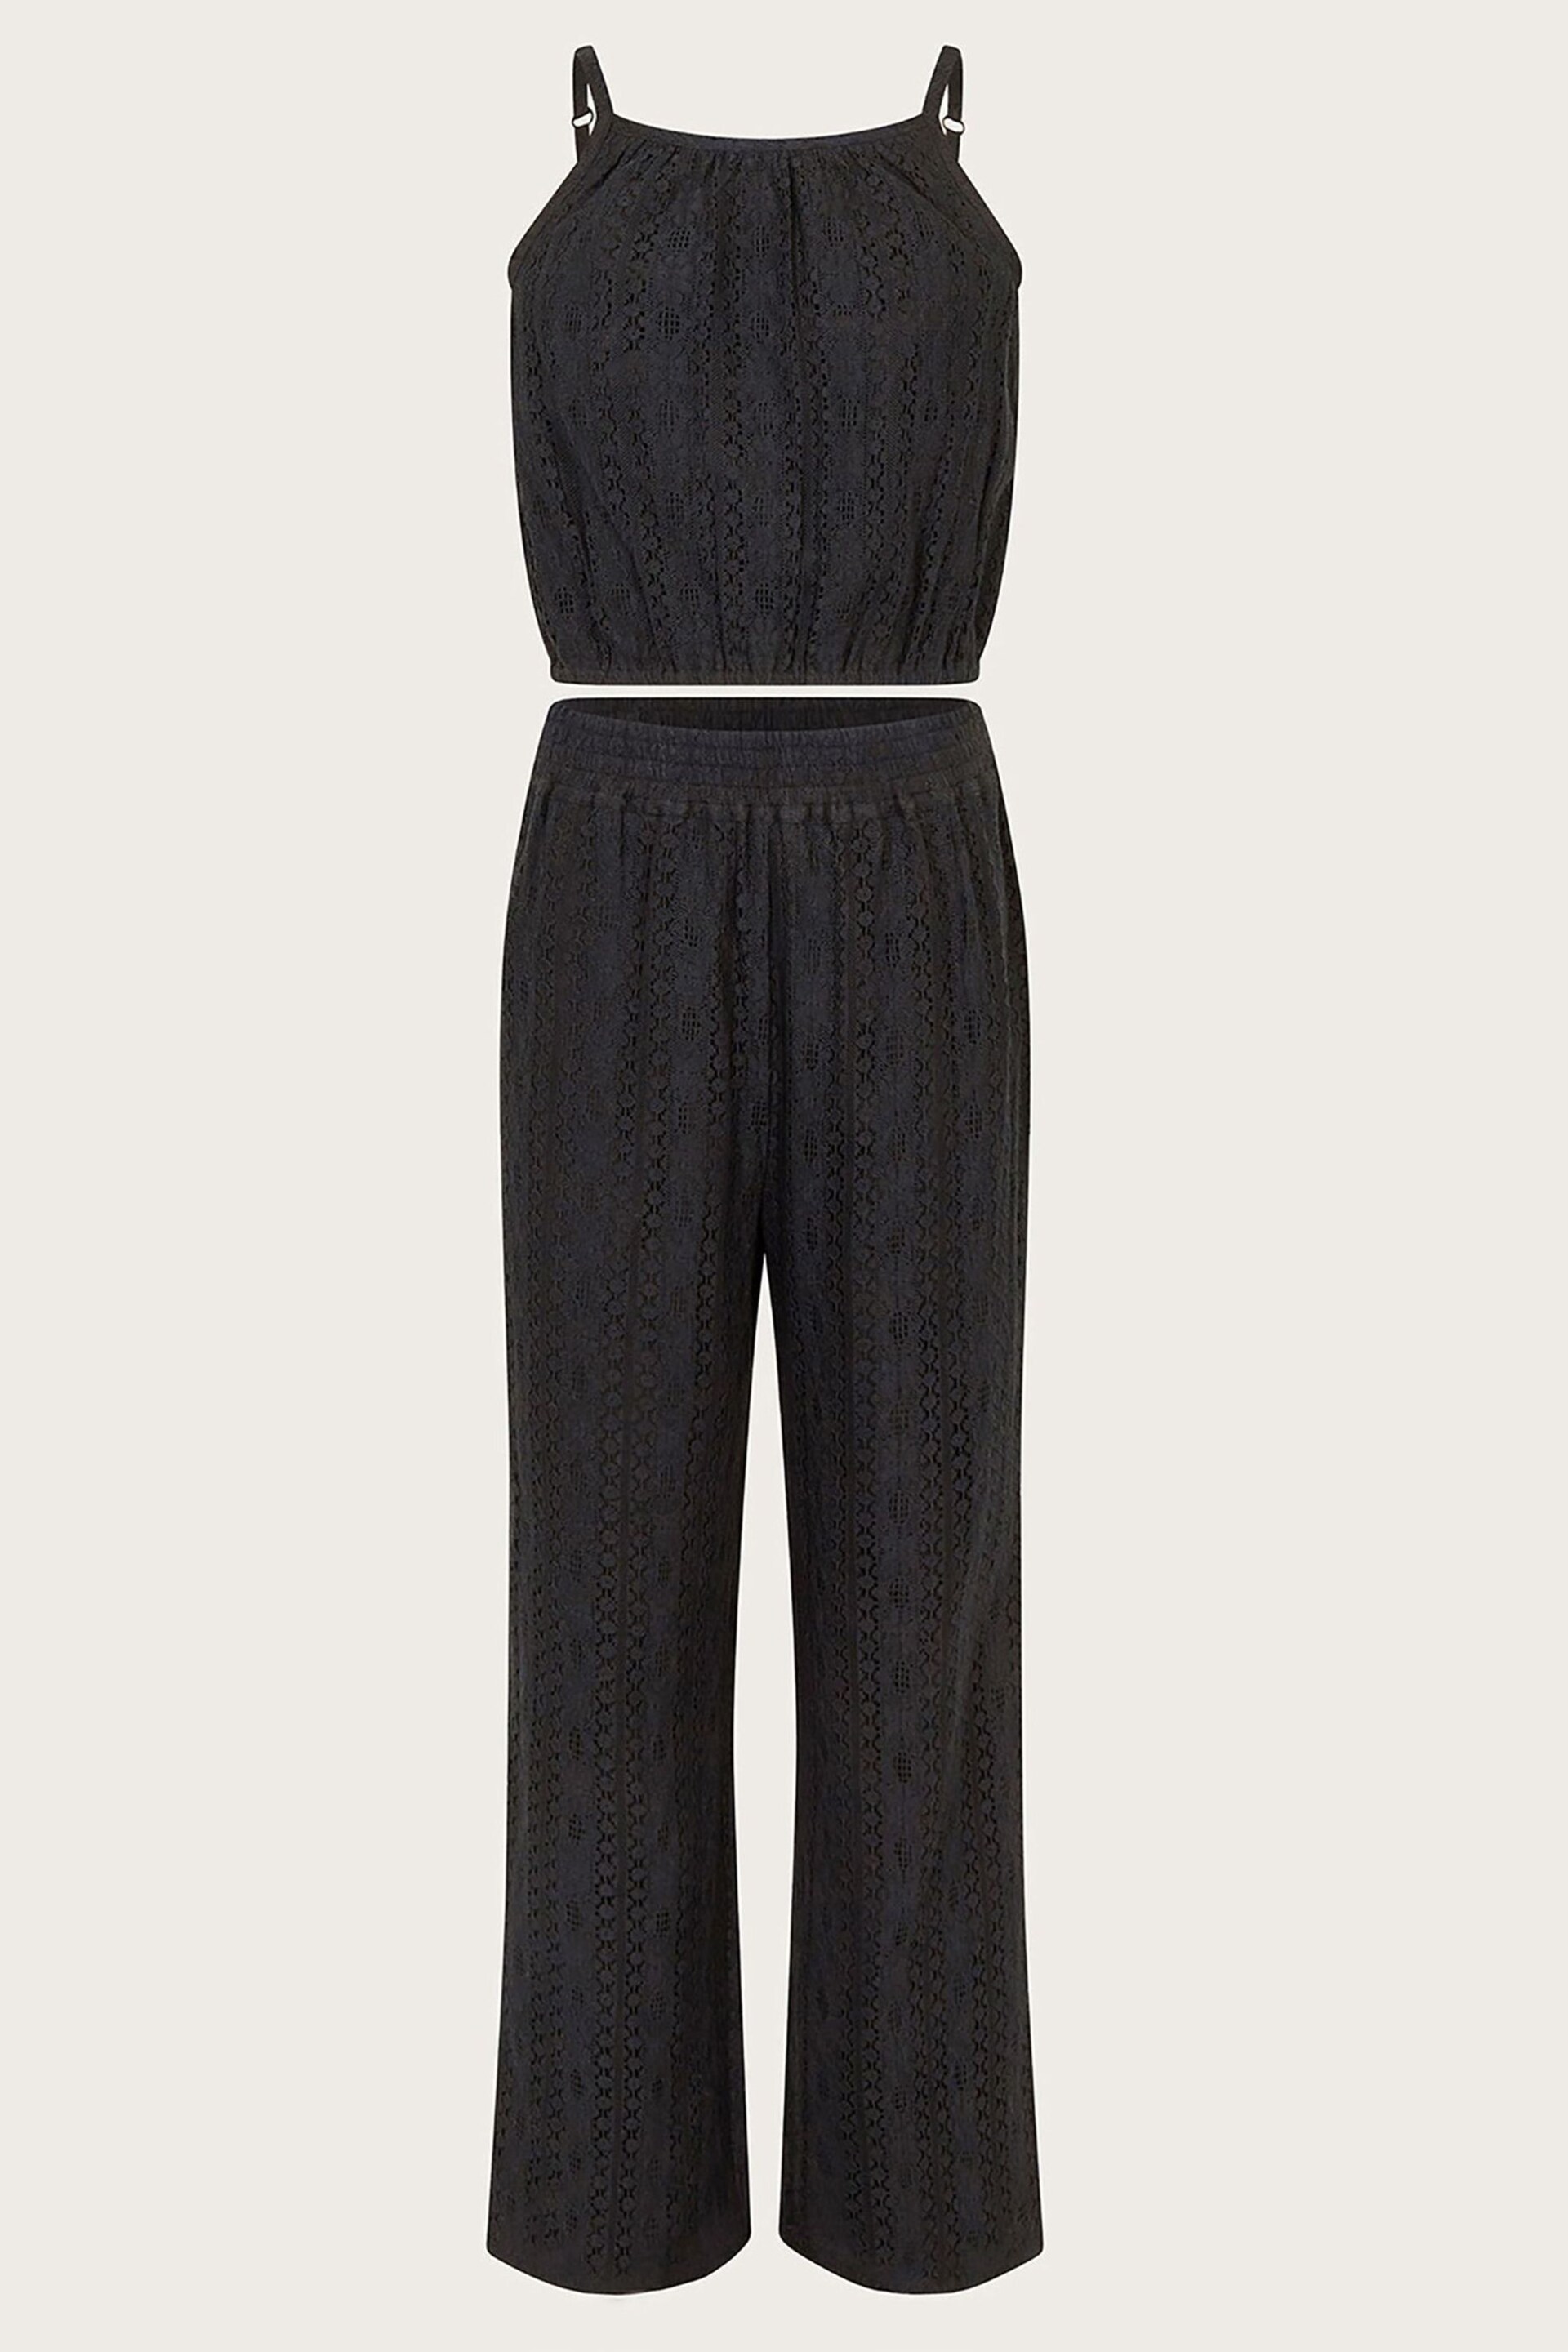 Monsoon Black Lace Top And Trousers Set - Image 1 of 4